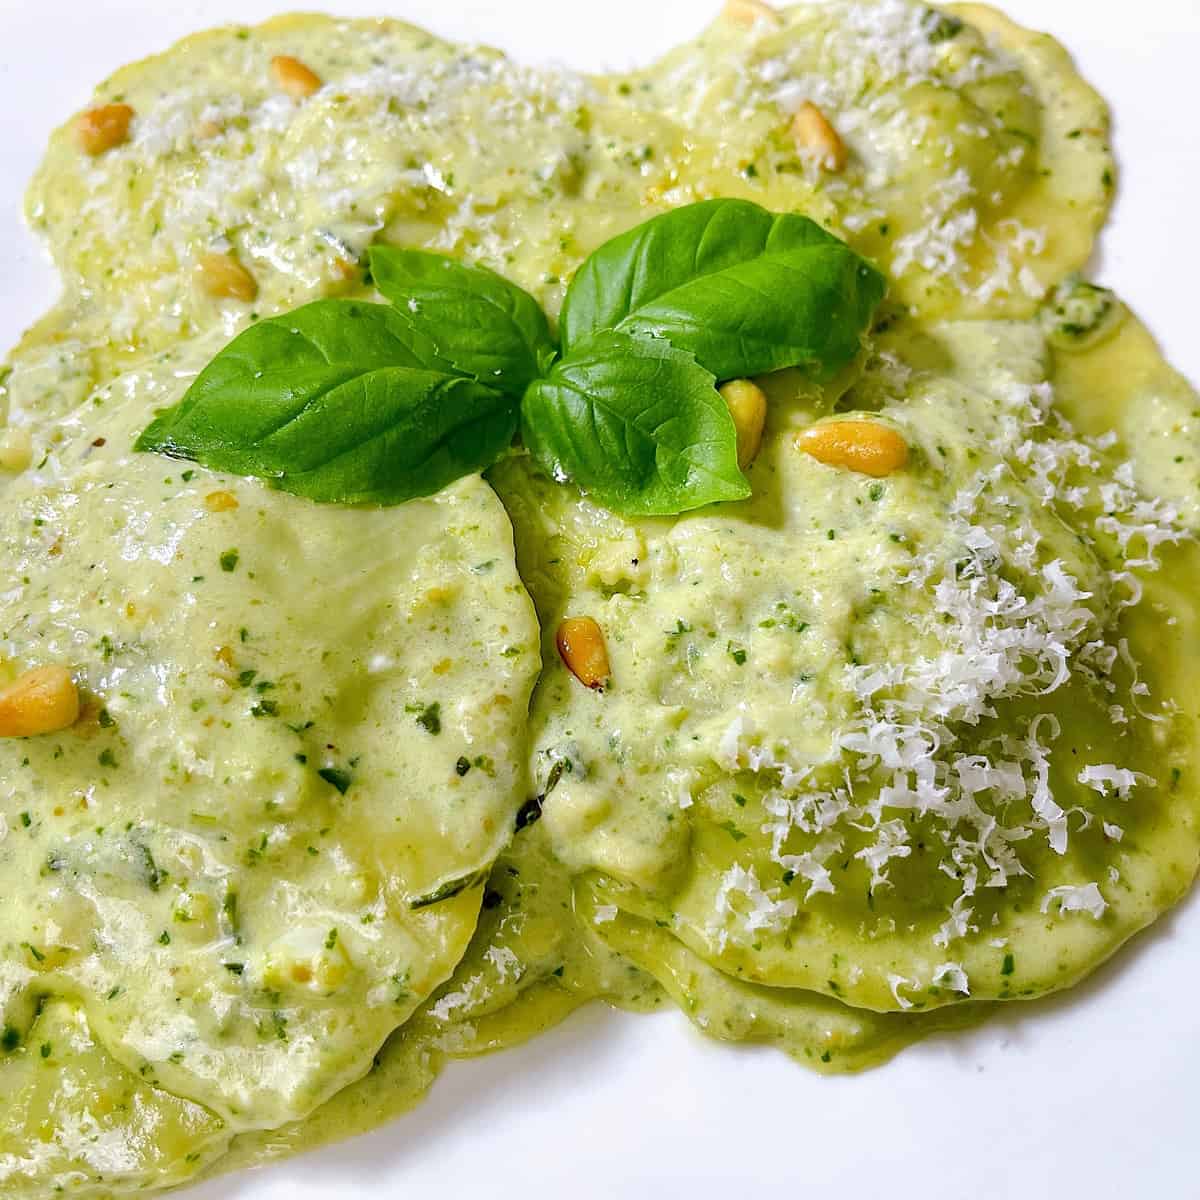 Spinach Ravioli with Pesto Cream Sauce​ topped with Parmesan and basil leaves